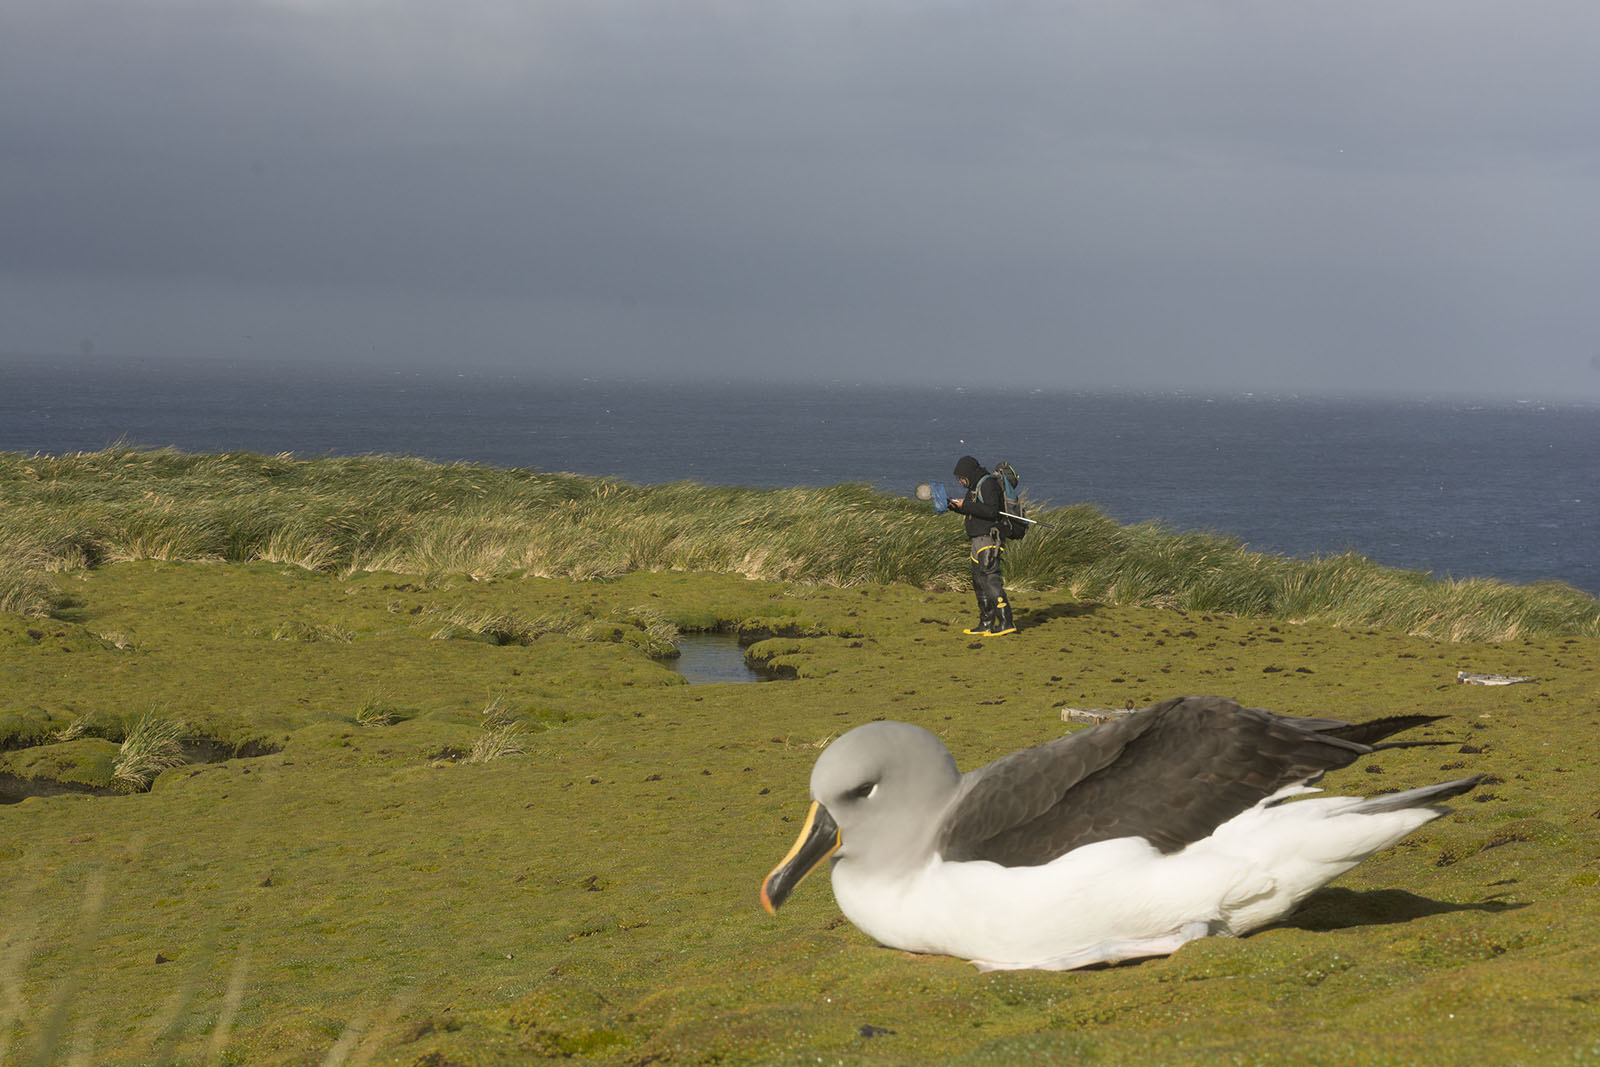 Coast photo of albatross with researcher in the distance